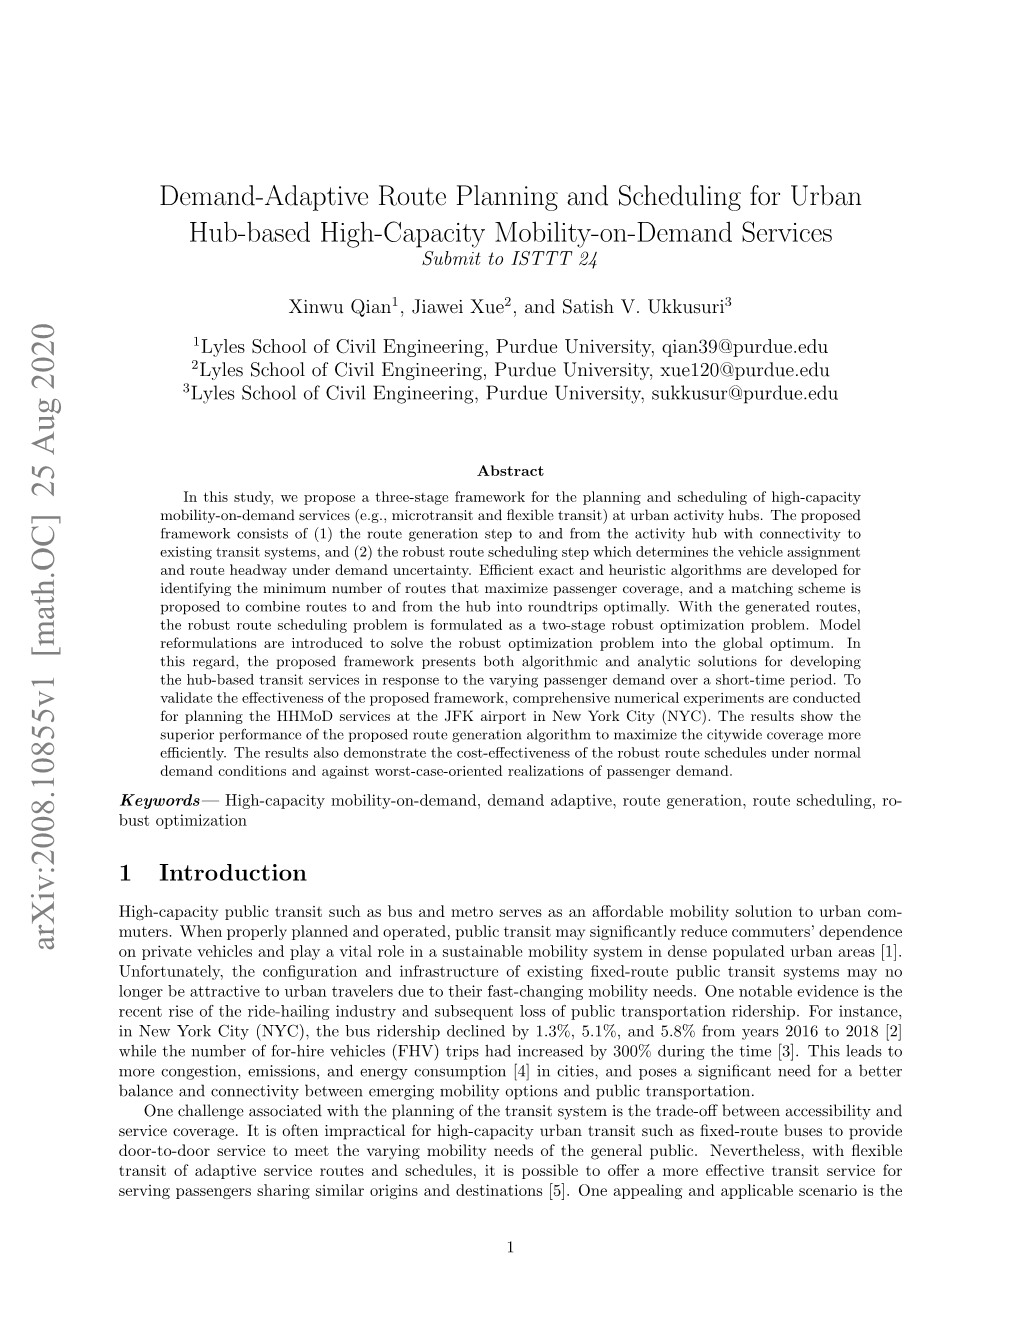 Demand-Adaptive Route Planning and Scheduling for Urban Hub-Based High-Capacity Mobility-On-Demand Services Submit to ISTTT 24